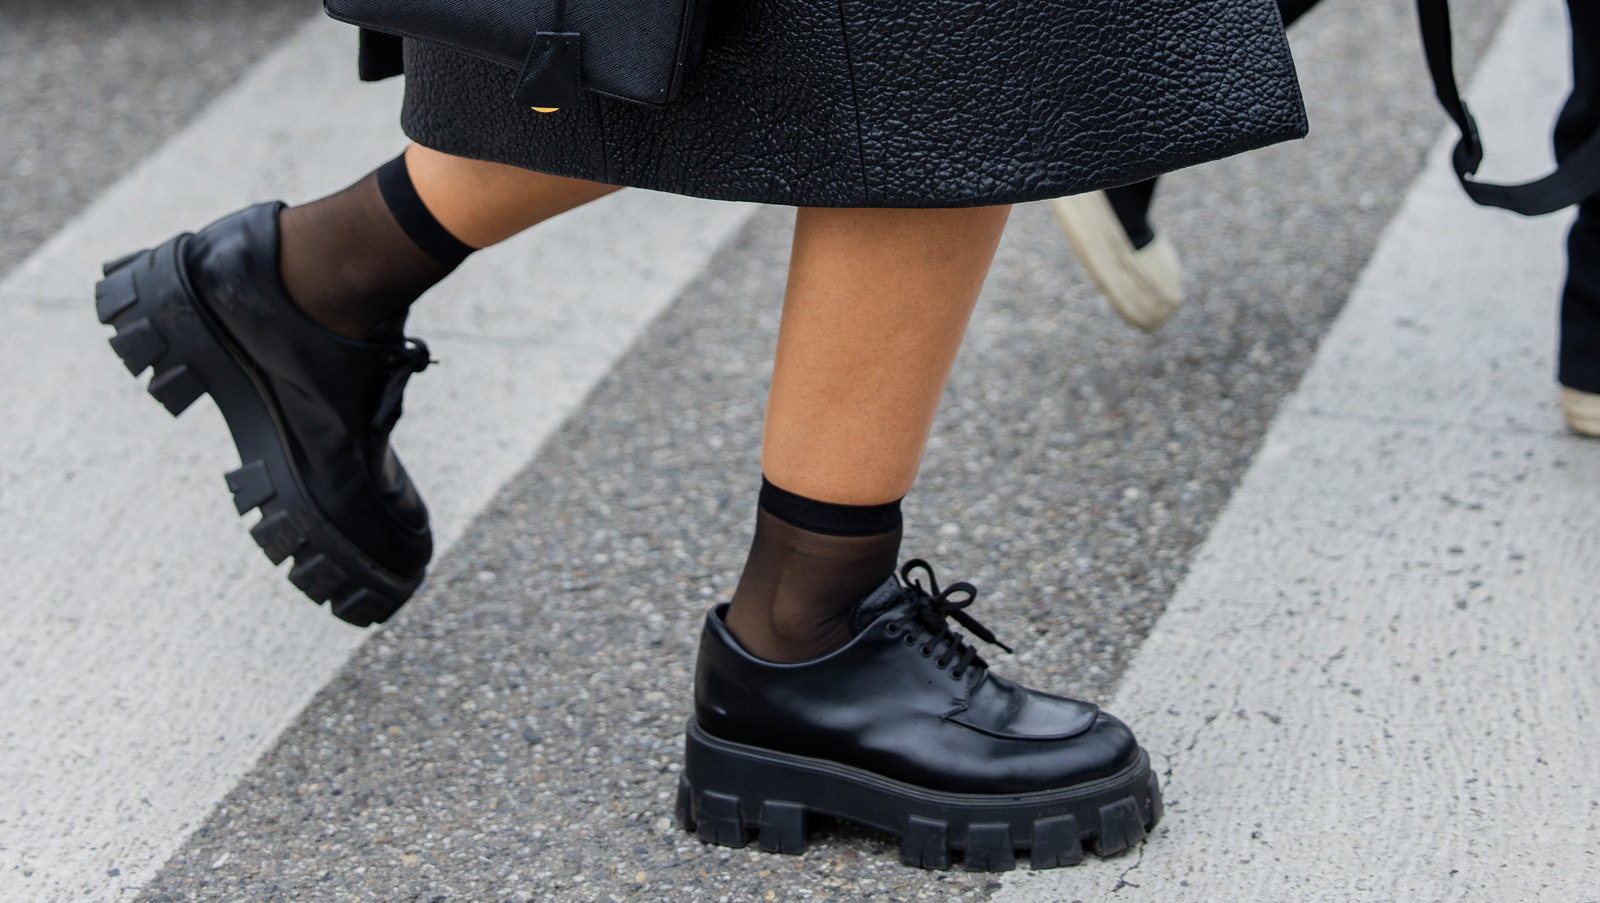 Sheer Socks Are Having A Major Fashion Moment For Winter 2023/2024 - Our  Tips To Style The Trend